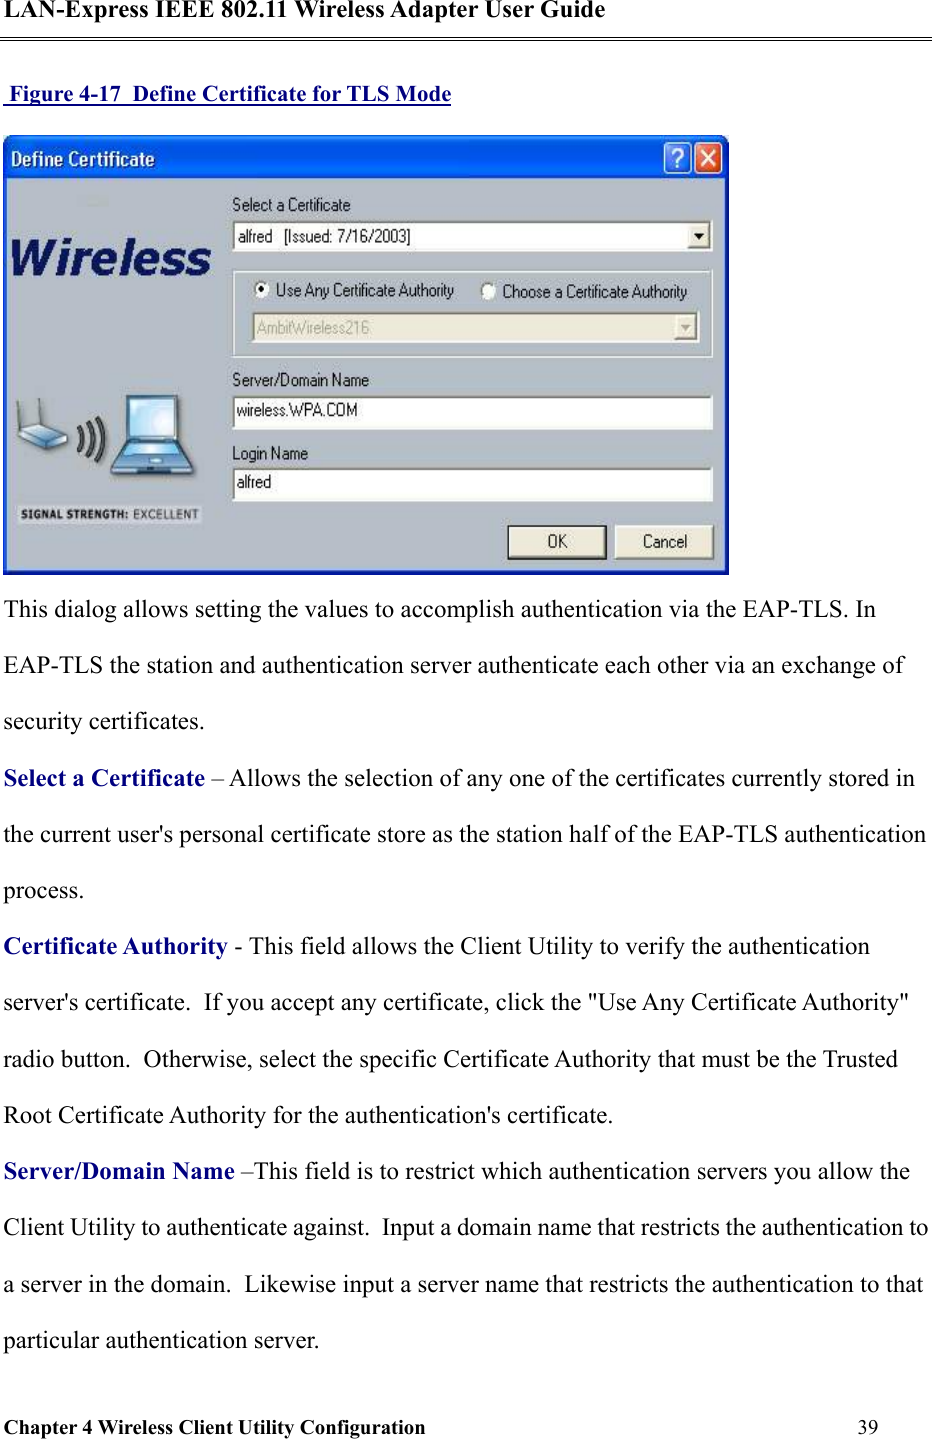 LAN-Express IEEE 802.11 Wireless Adapter User Guide Chapter 4 Wireless Client Utility Configuration   39   Figure 4-17  Define Certificate for TLS Mode  This dialog allows setting the values to accomplish authentication via the EAP-TLS. In EAP-TLS the station and authentication server authenticate each other via an exchange of security certificates. Select a Certificate – Allows the selection of any one of the certificates currently stored in the current user&apos;s personal certificate store as the station half of the EAP-TLS authentication process.  Certificate Authority - This field allows the Client Utility to verify the authentication server&apos;s certificate.  If you accept any certificate, click the &quot;Use Any Certificate Authority&quot; radio button.  Otherwise, select the specific Certificate Authority that must be the Trusted Root Certificate Authority for the authentication&apos;s certificate. Server/Domain Name –This field is to restrict which authentication servers you allow the Client Utility to authenticate against.  Input a domain name that restricts the authentication to a server in the domain.  Likewise input a server name that restricts the authentication to that particular authentication server.  